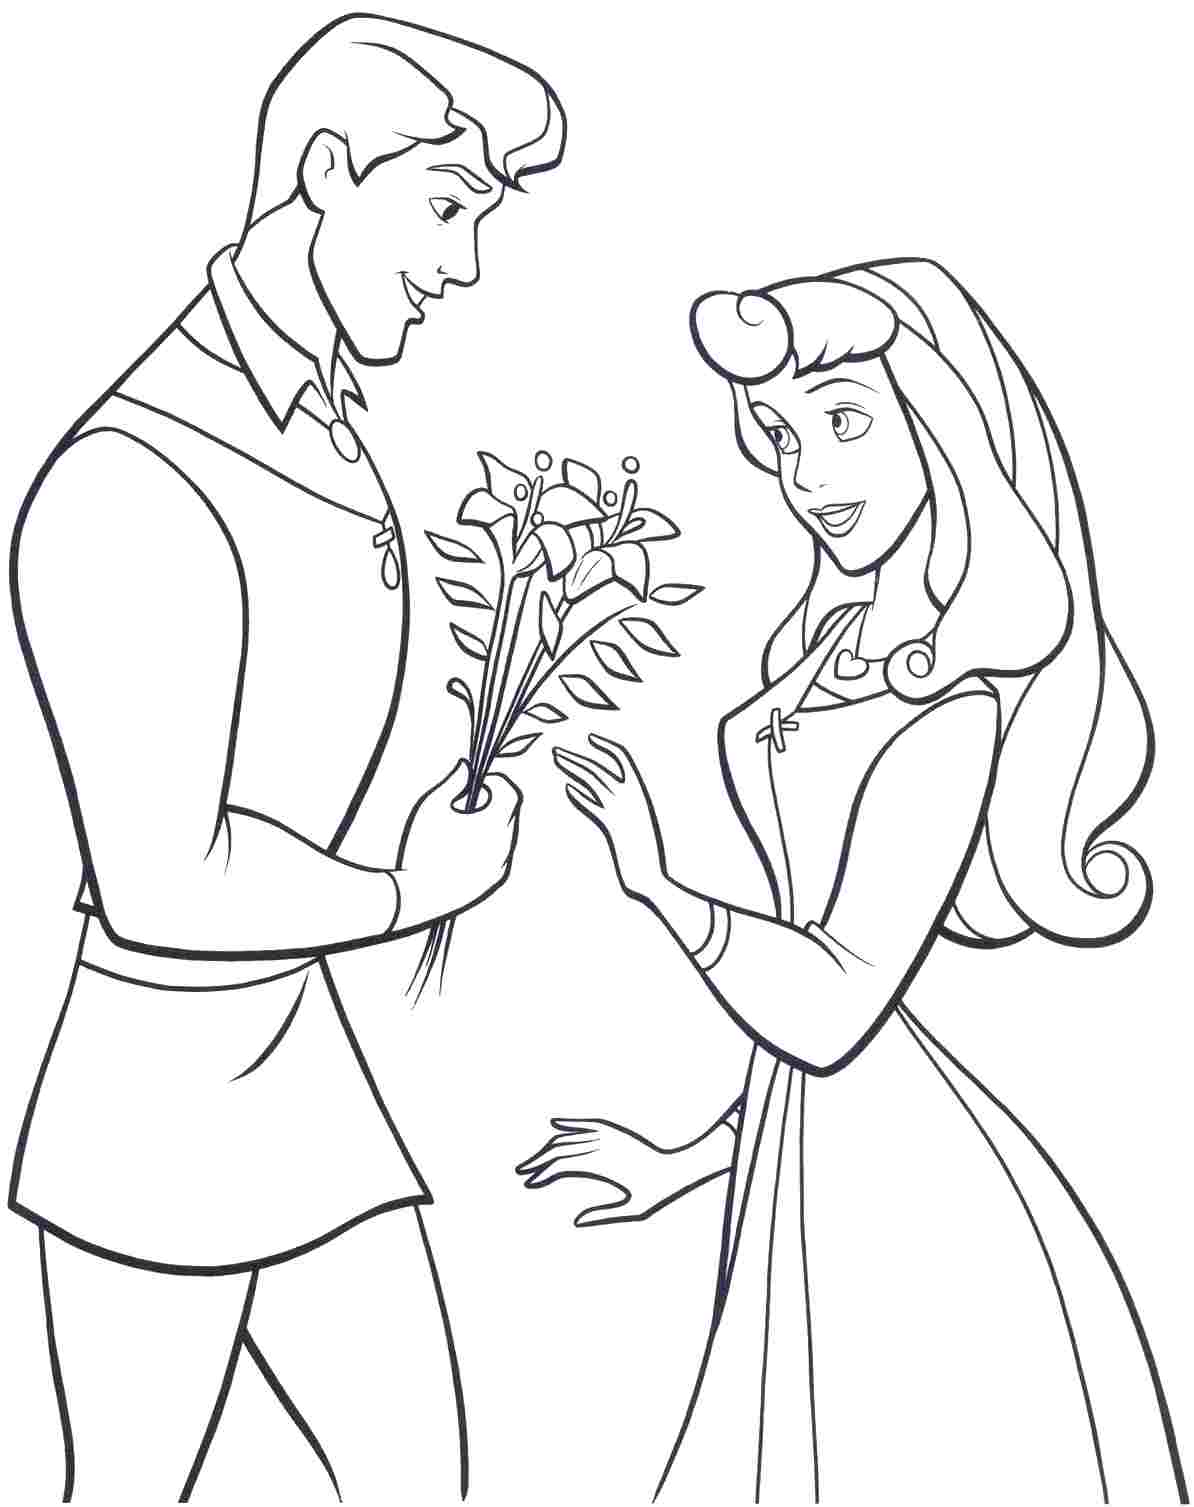 Disney Princess Aurora - Free Coloring Pages for Kids